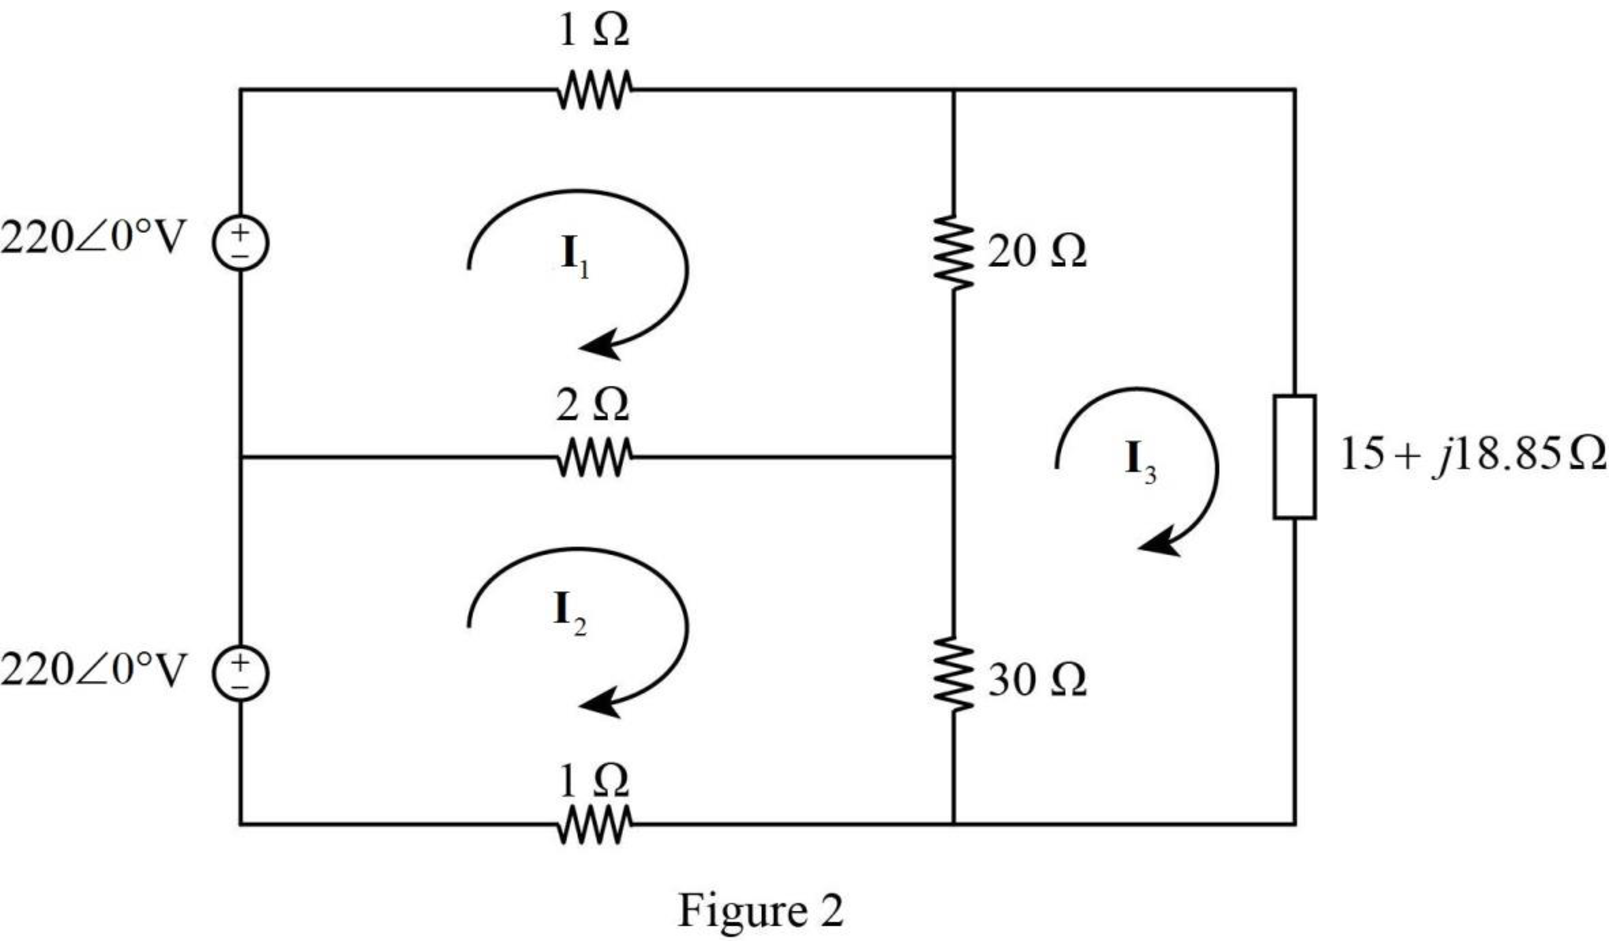 EBK FUNDAMENTALS OF ELECTRIC CIRCUITS, Chapter 12, Problem 87CP 